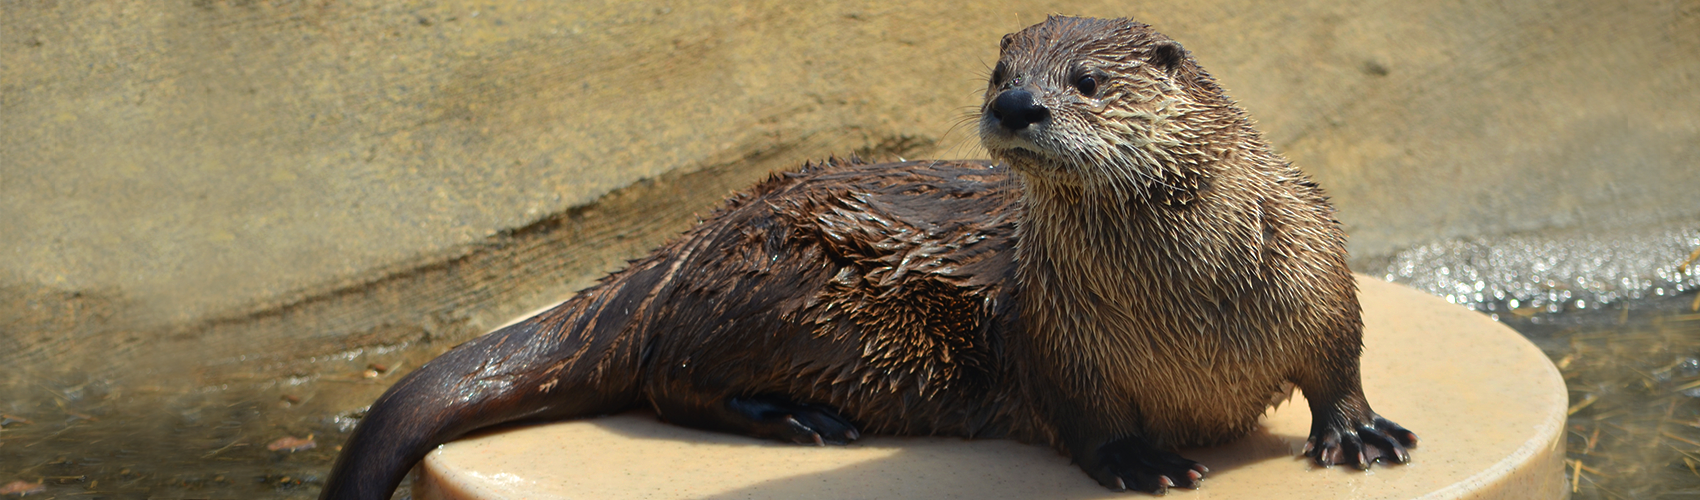 Otter sitting on enrichment disc